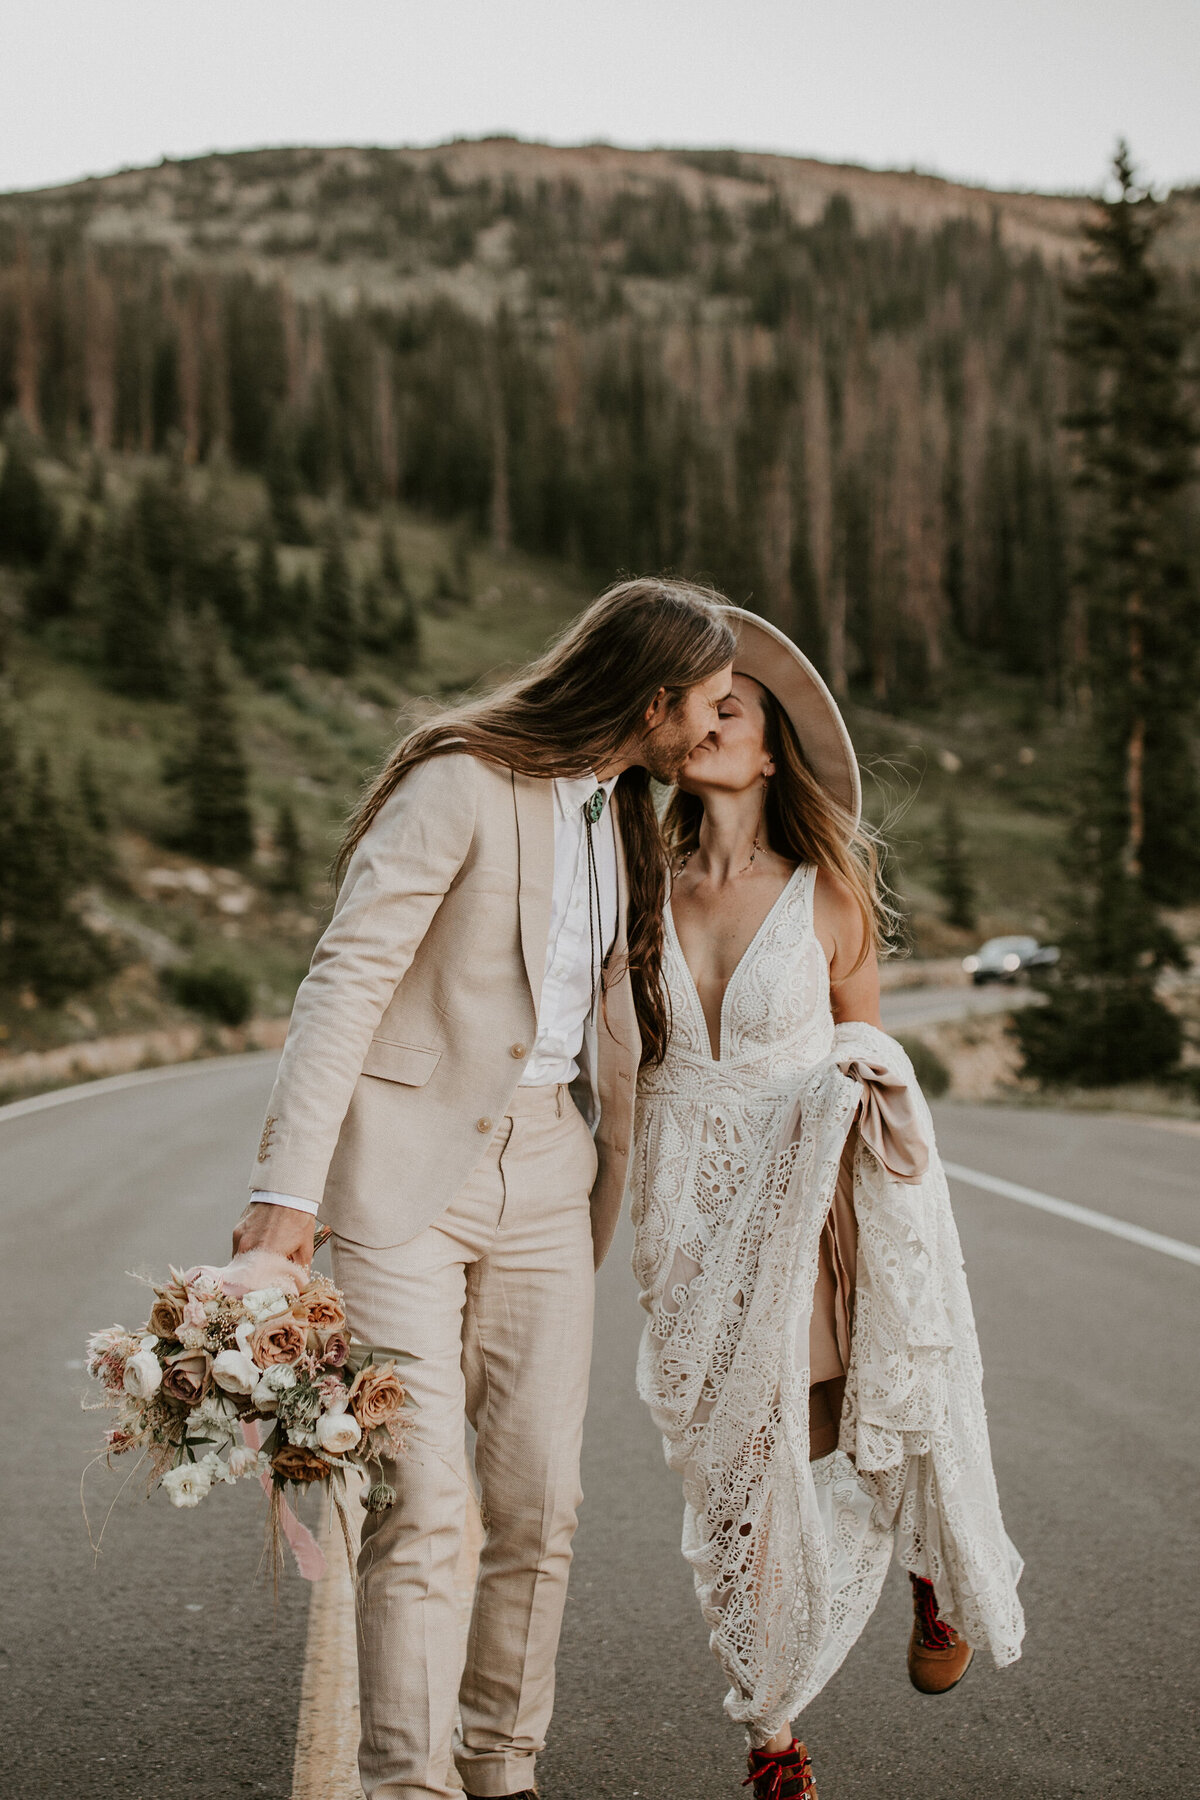 Bride and groom wearing an ivory dress and suit kissing in the middle of the road with mountains in the background